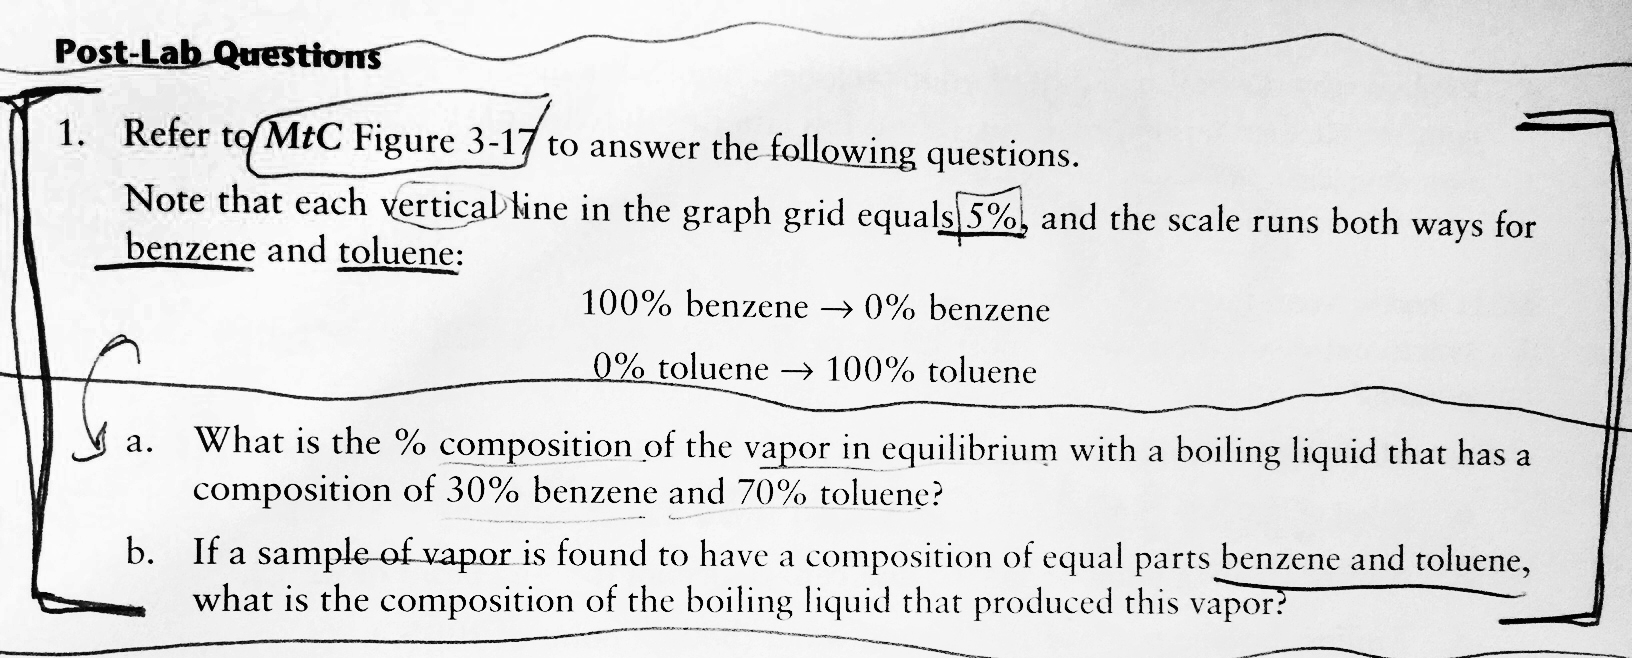 Image for (a) What is the % composition of the vapor in equilibrium with a boiling liquid that has a composition of 30%